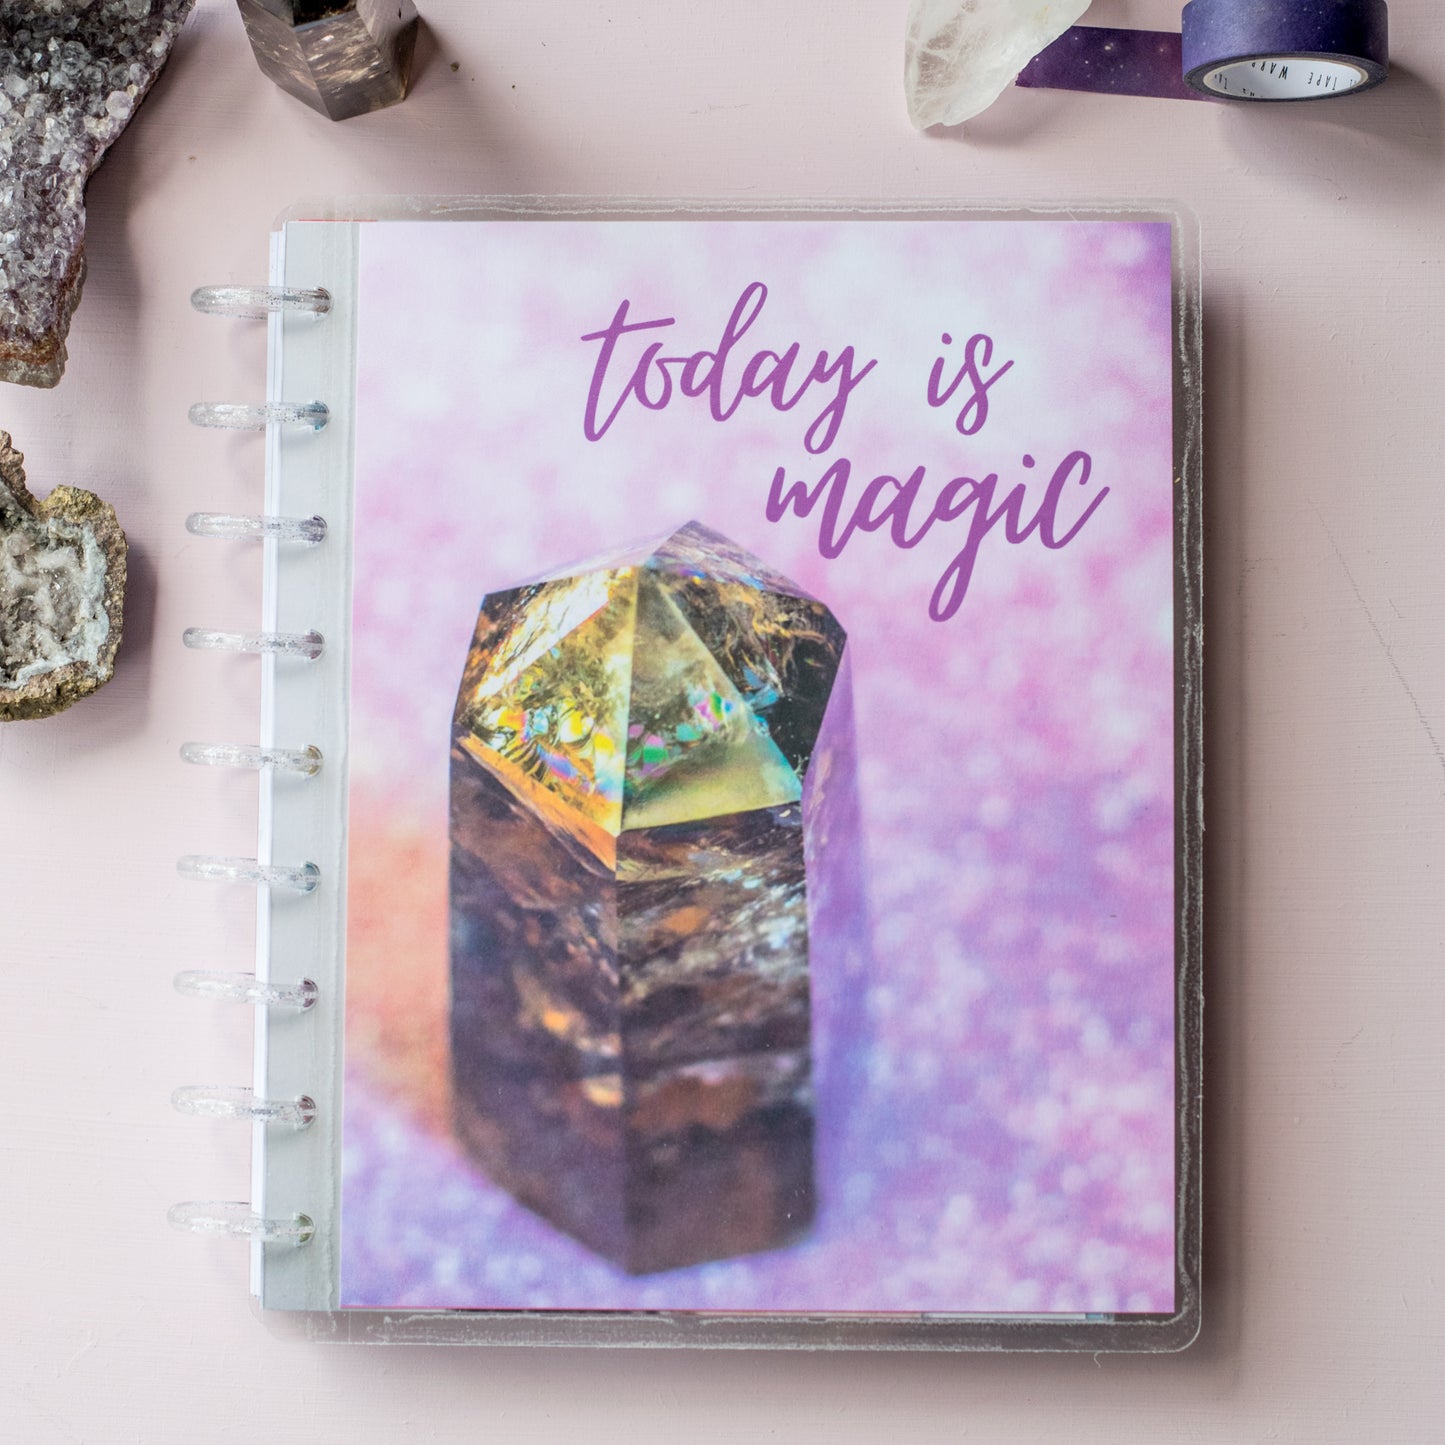 Crystal Day Planner Inserts for Happy Planner